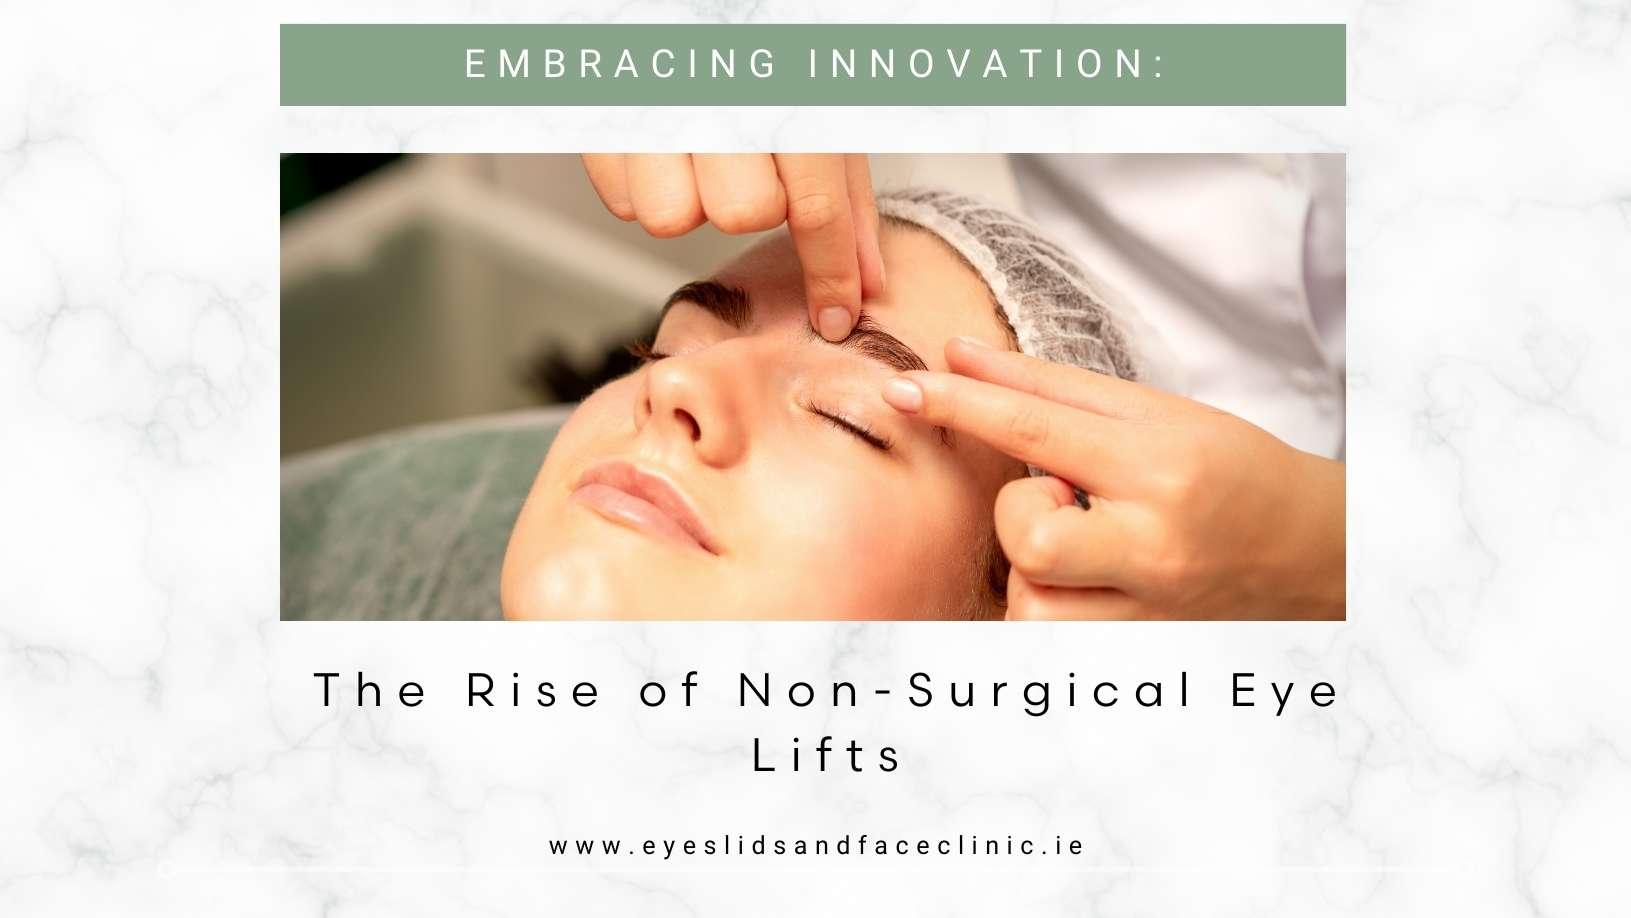 The Rise of Non-Surgical Eye Lifts